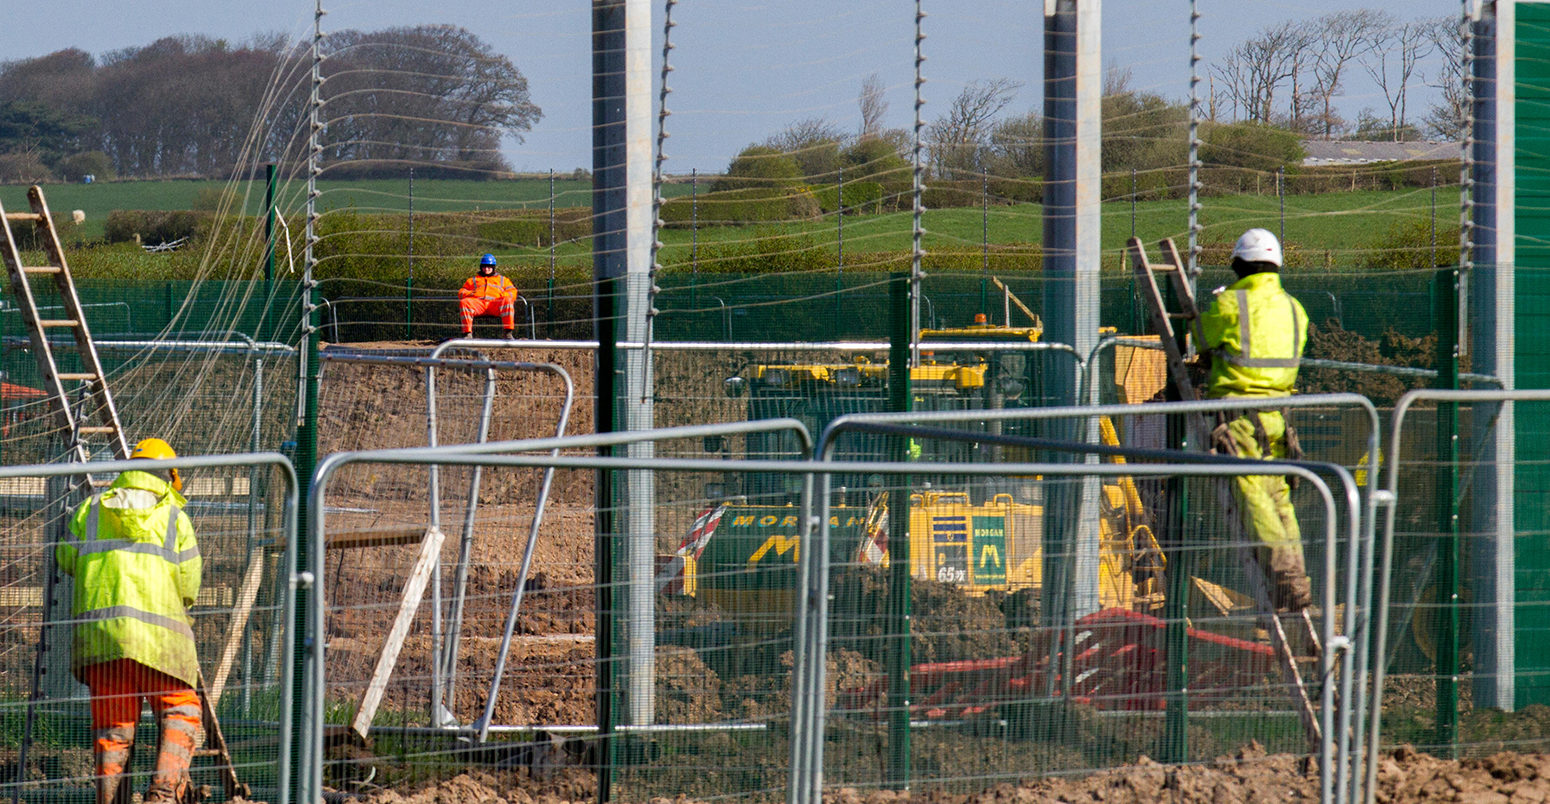 HWR28E Caudrilla Exploration Site, Blackpool, UK. 4th April, 2017. Heavy Police presence in response to demonstrators that continue to picket the area around the fracking for shale gas approved site in Westby-by Plumpton, in Lancashire as work continues at the first horizontal fracking site in the UK for shale gas extraction. The government approved energy firm Cuadrilla's plans to frack at the Preston New Road site at Little Plumpton in October last year. Credit; MediaWorldImages/AlamyLiveNews